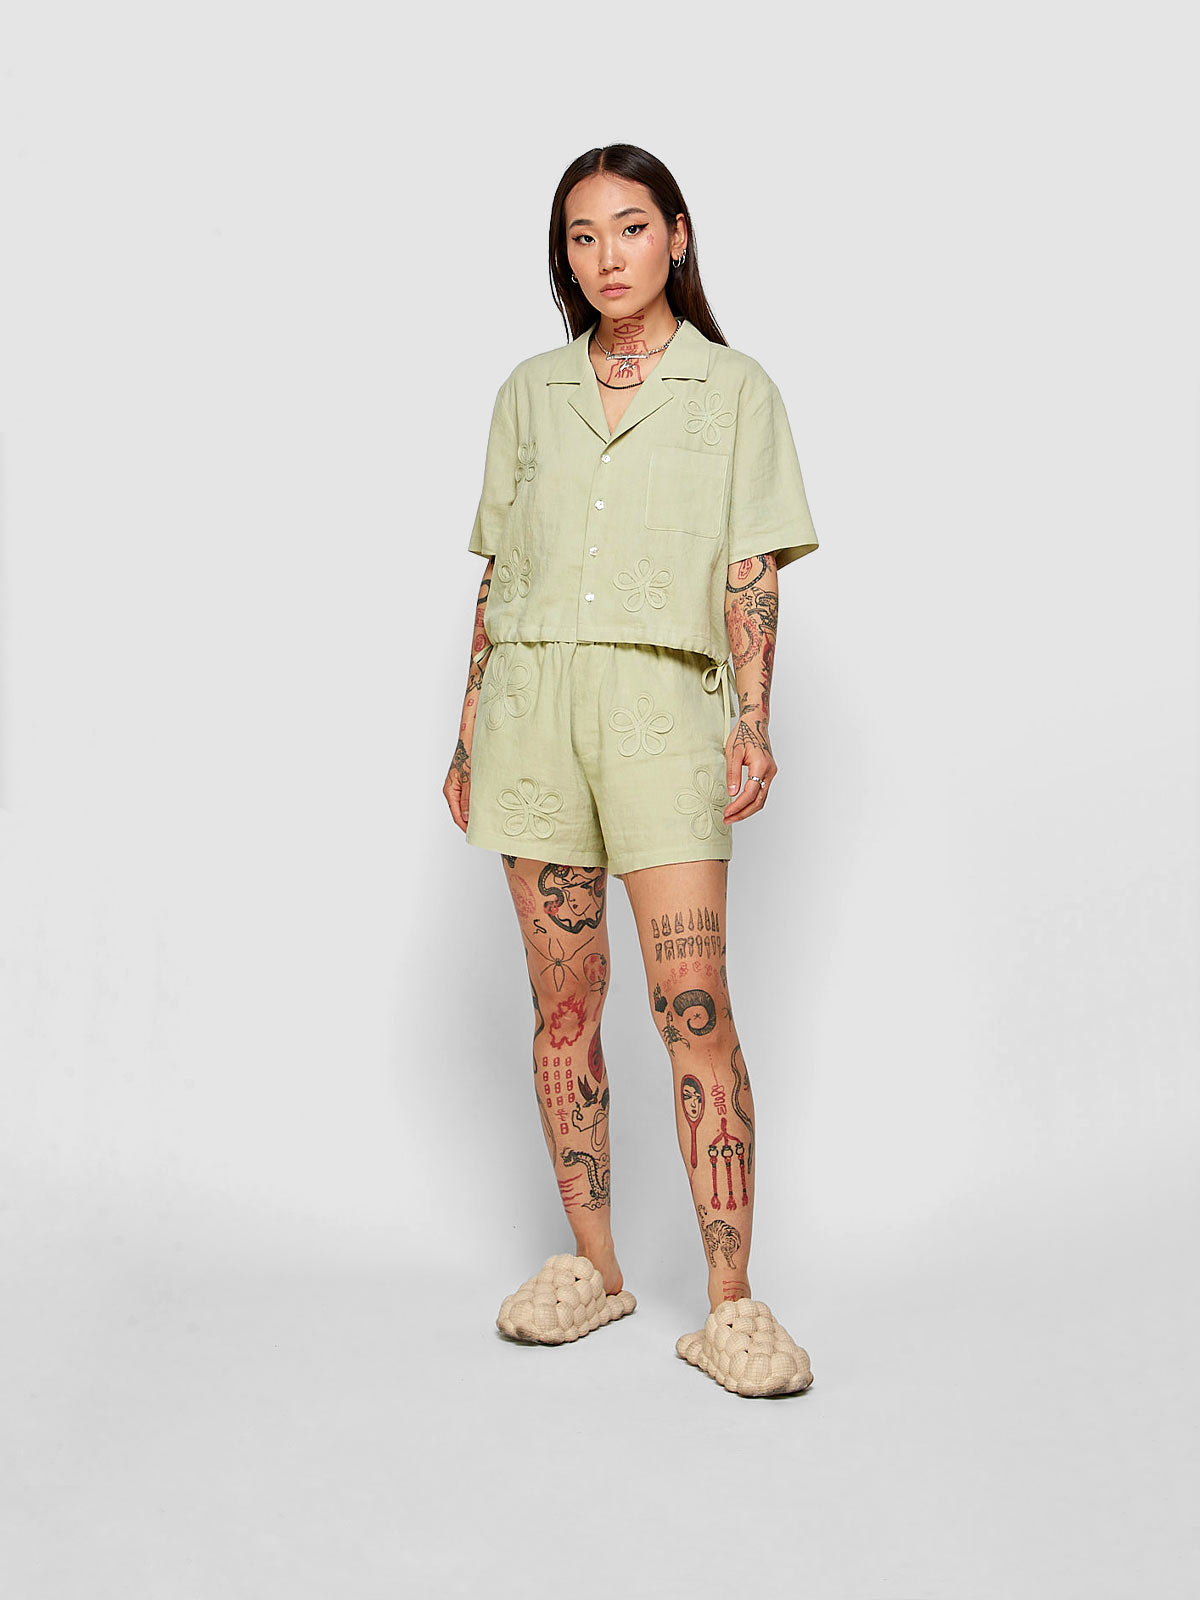 Photo of Matcha Women's Flower Knot Short [Collab x The Qi], number 2